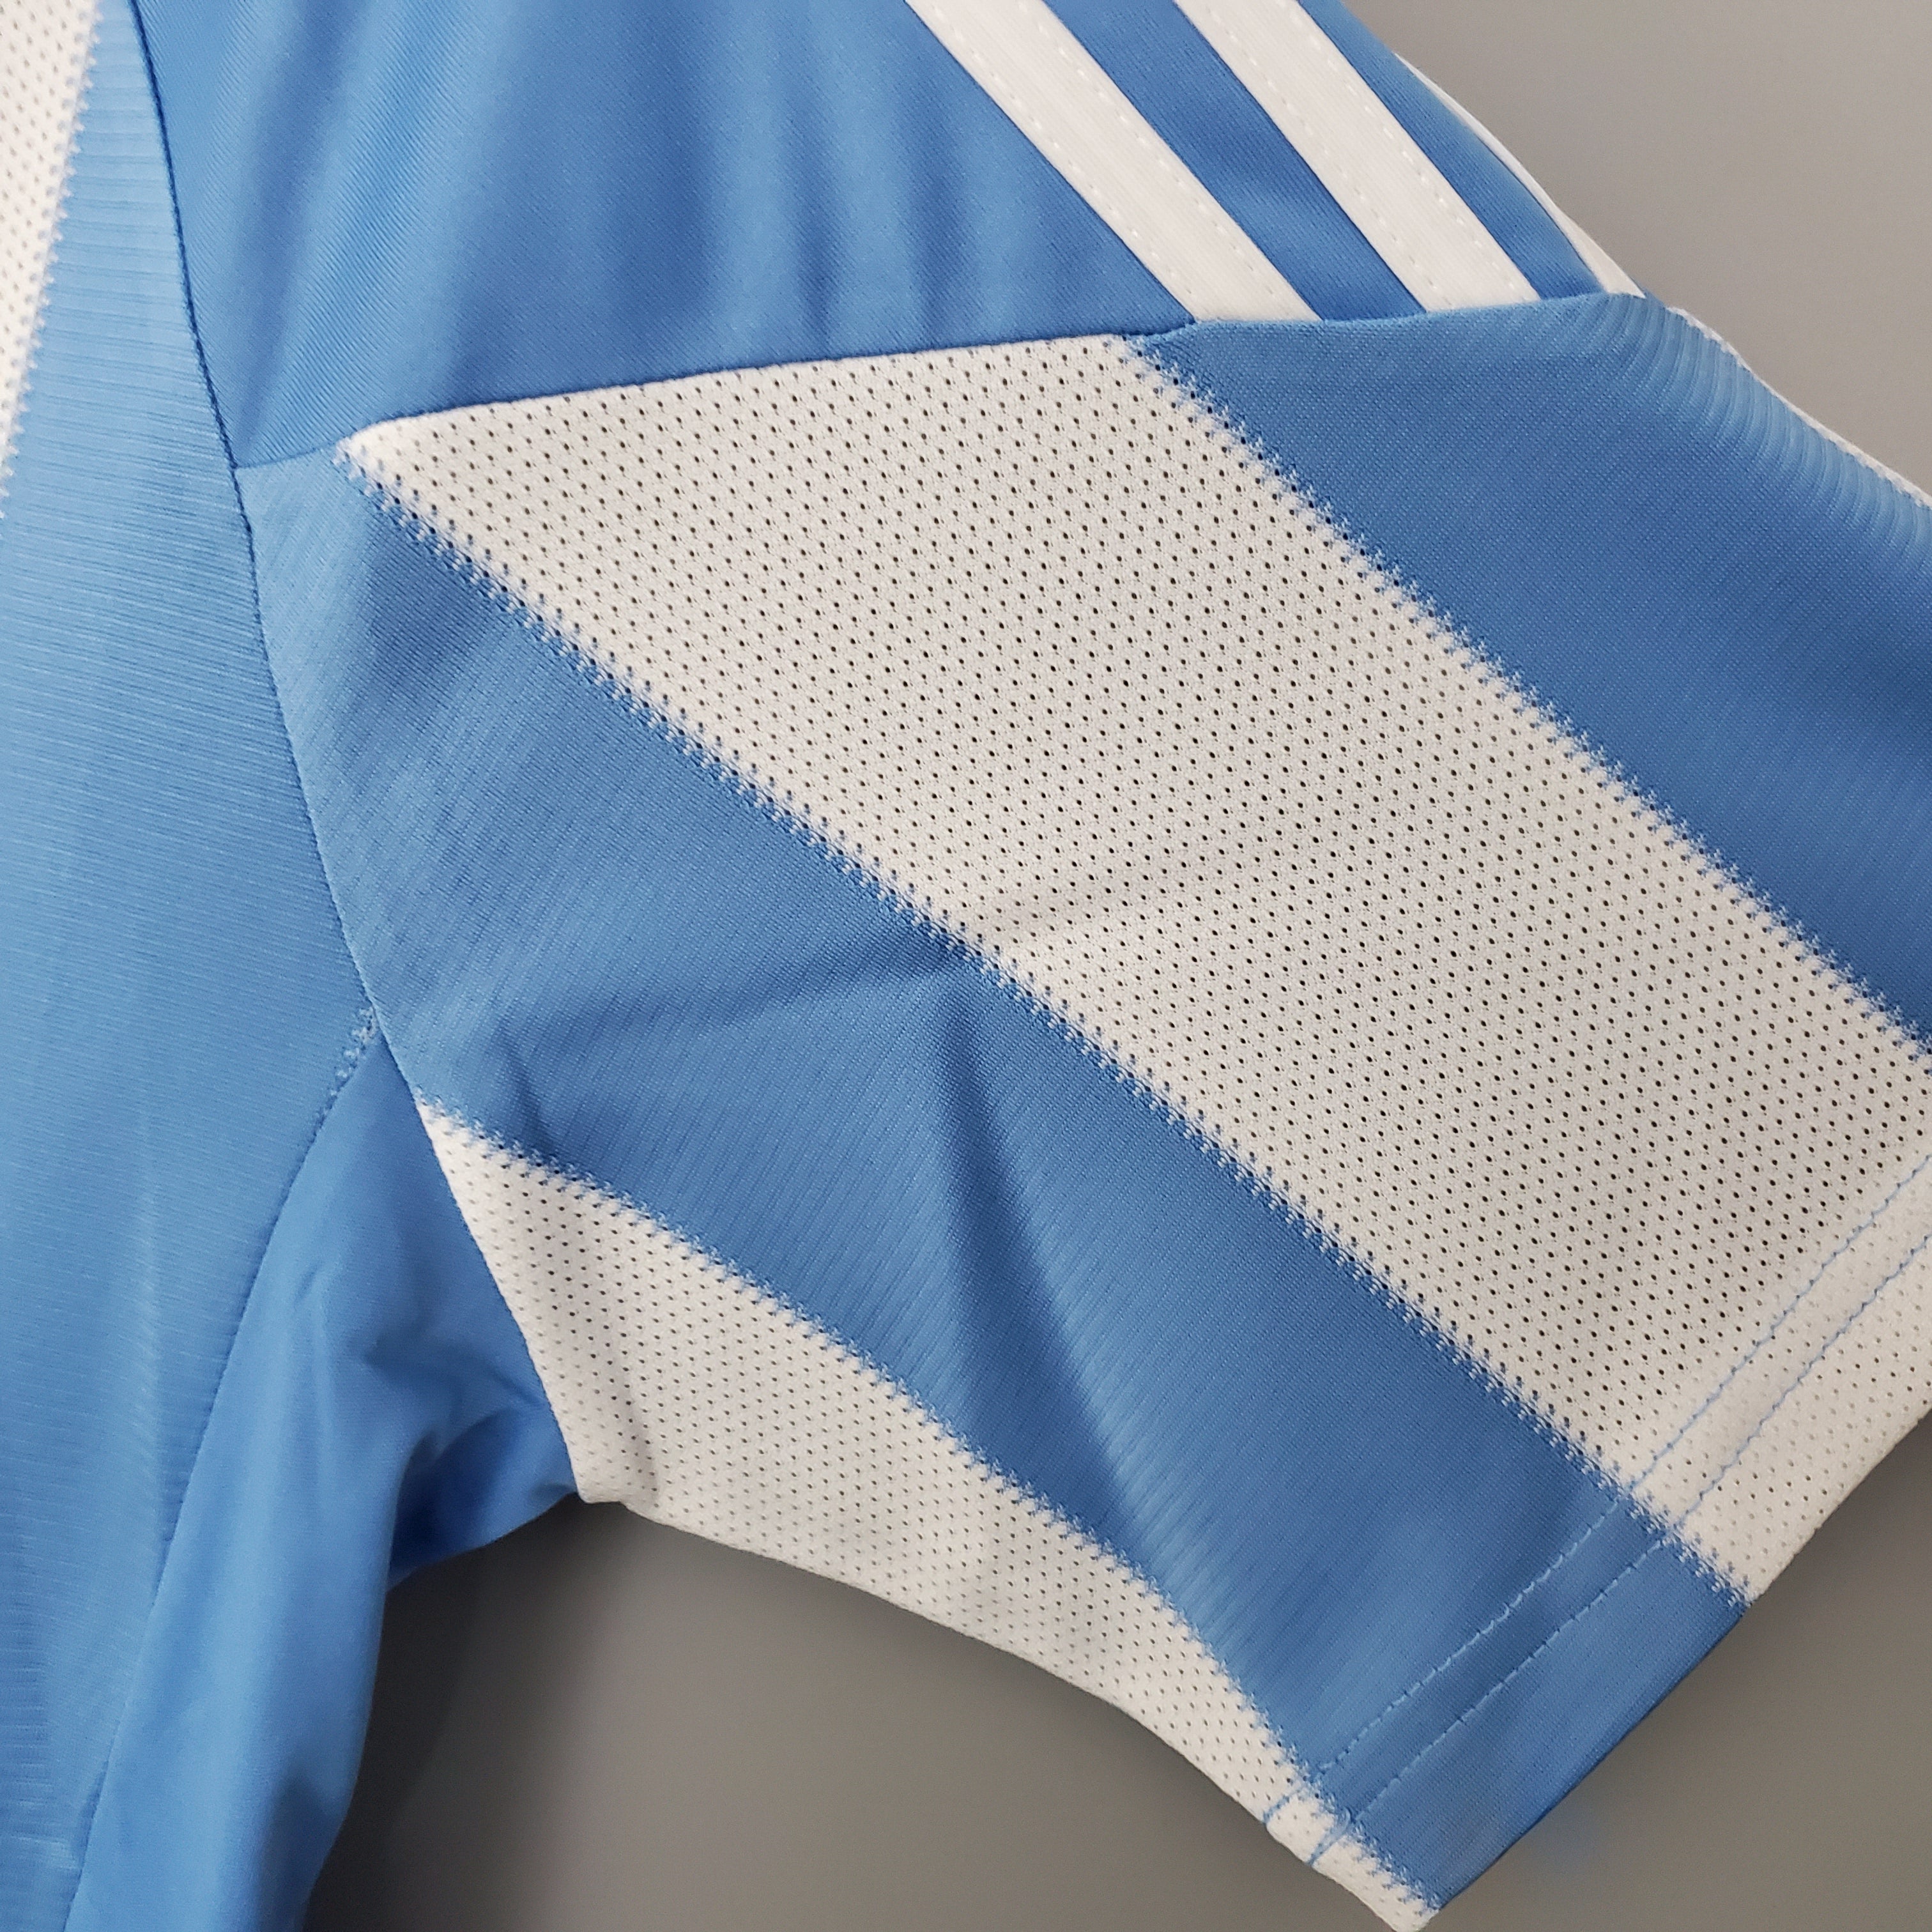 Argentine Maillot Rétro 2010 - Maxis Kits